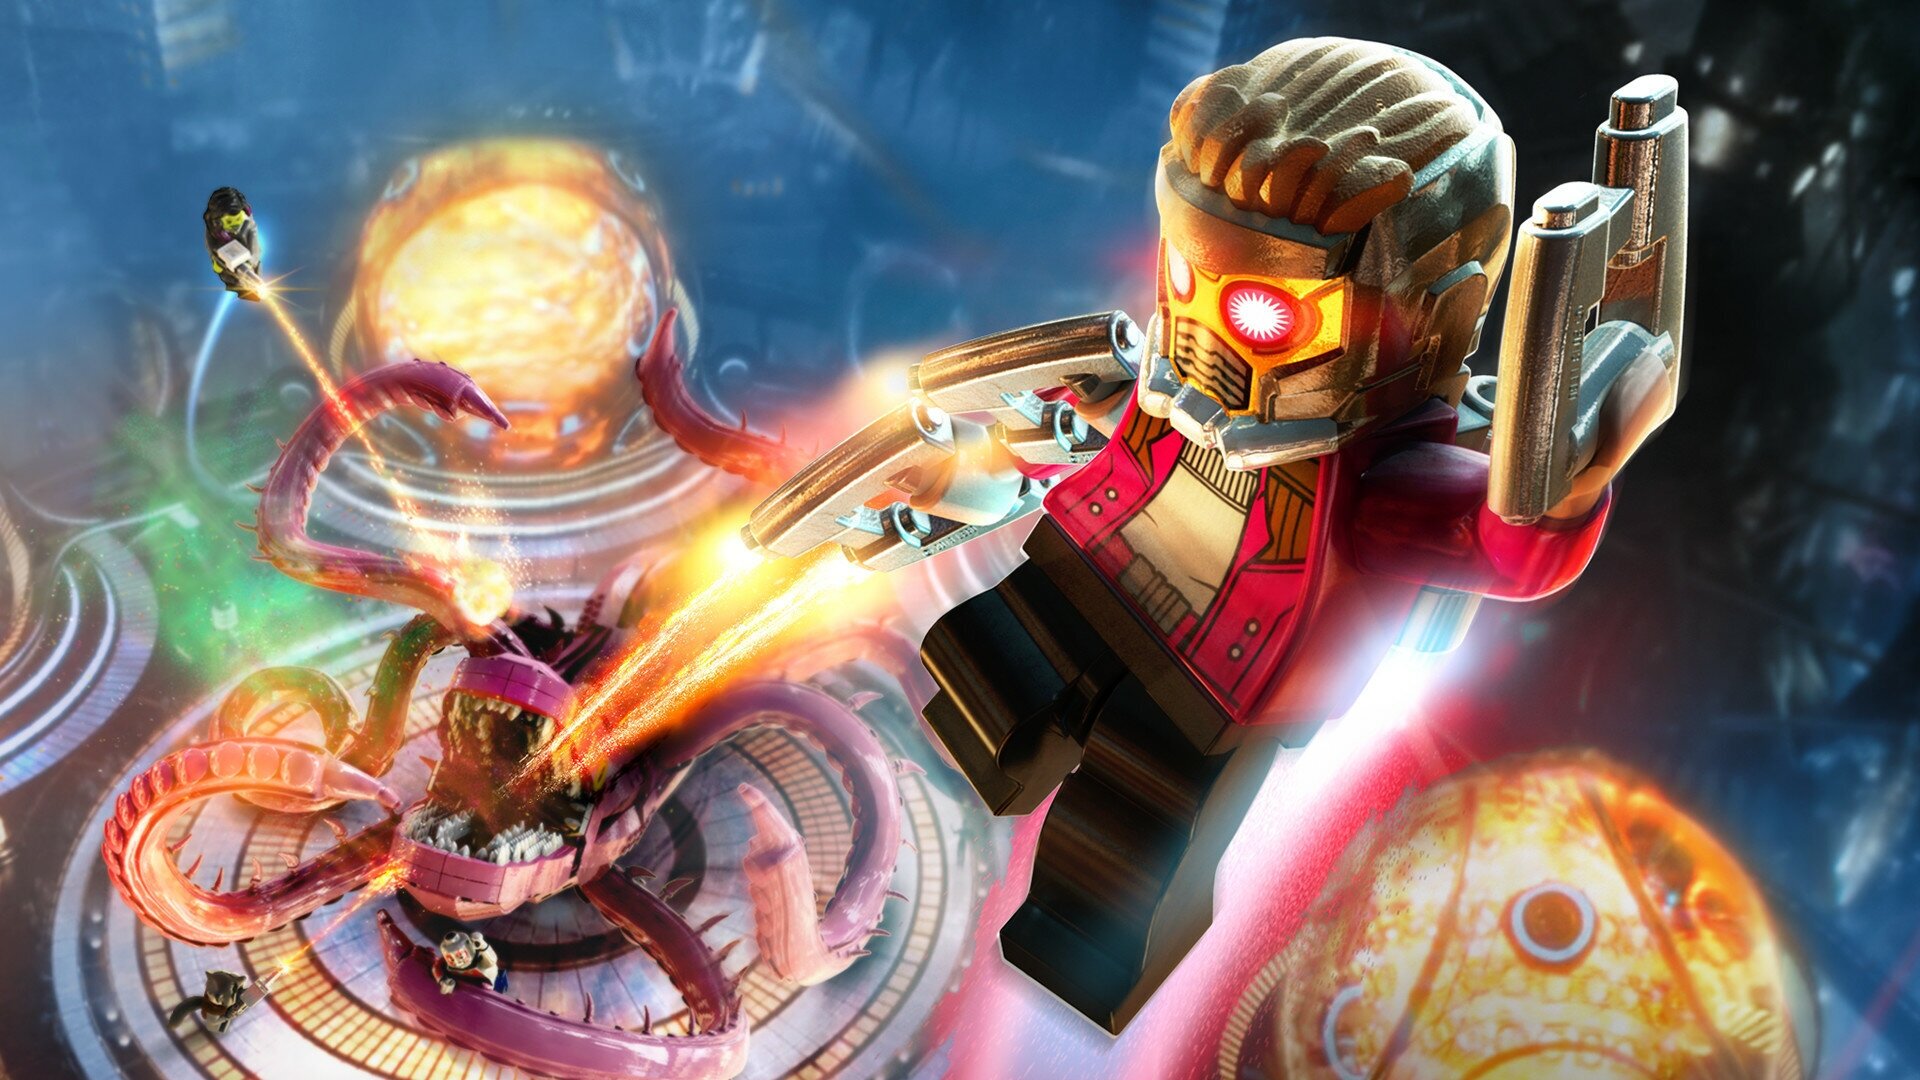 Lego marvel super heroes steam фото 52